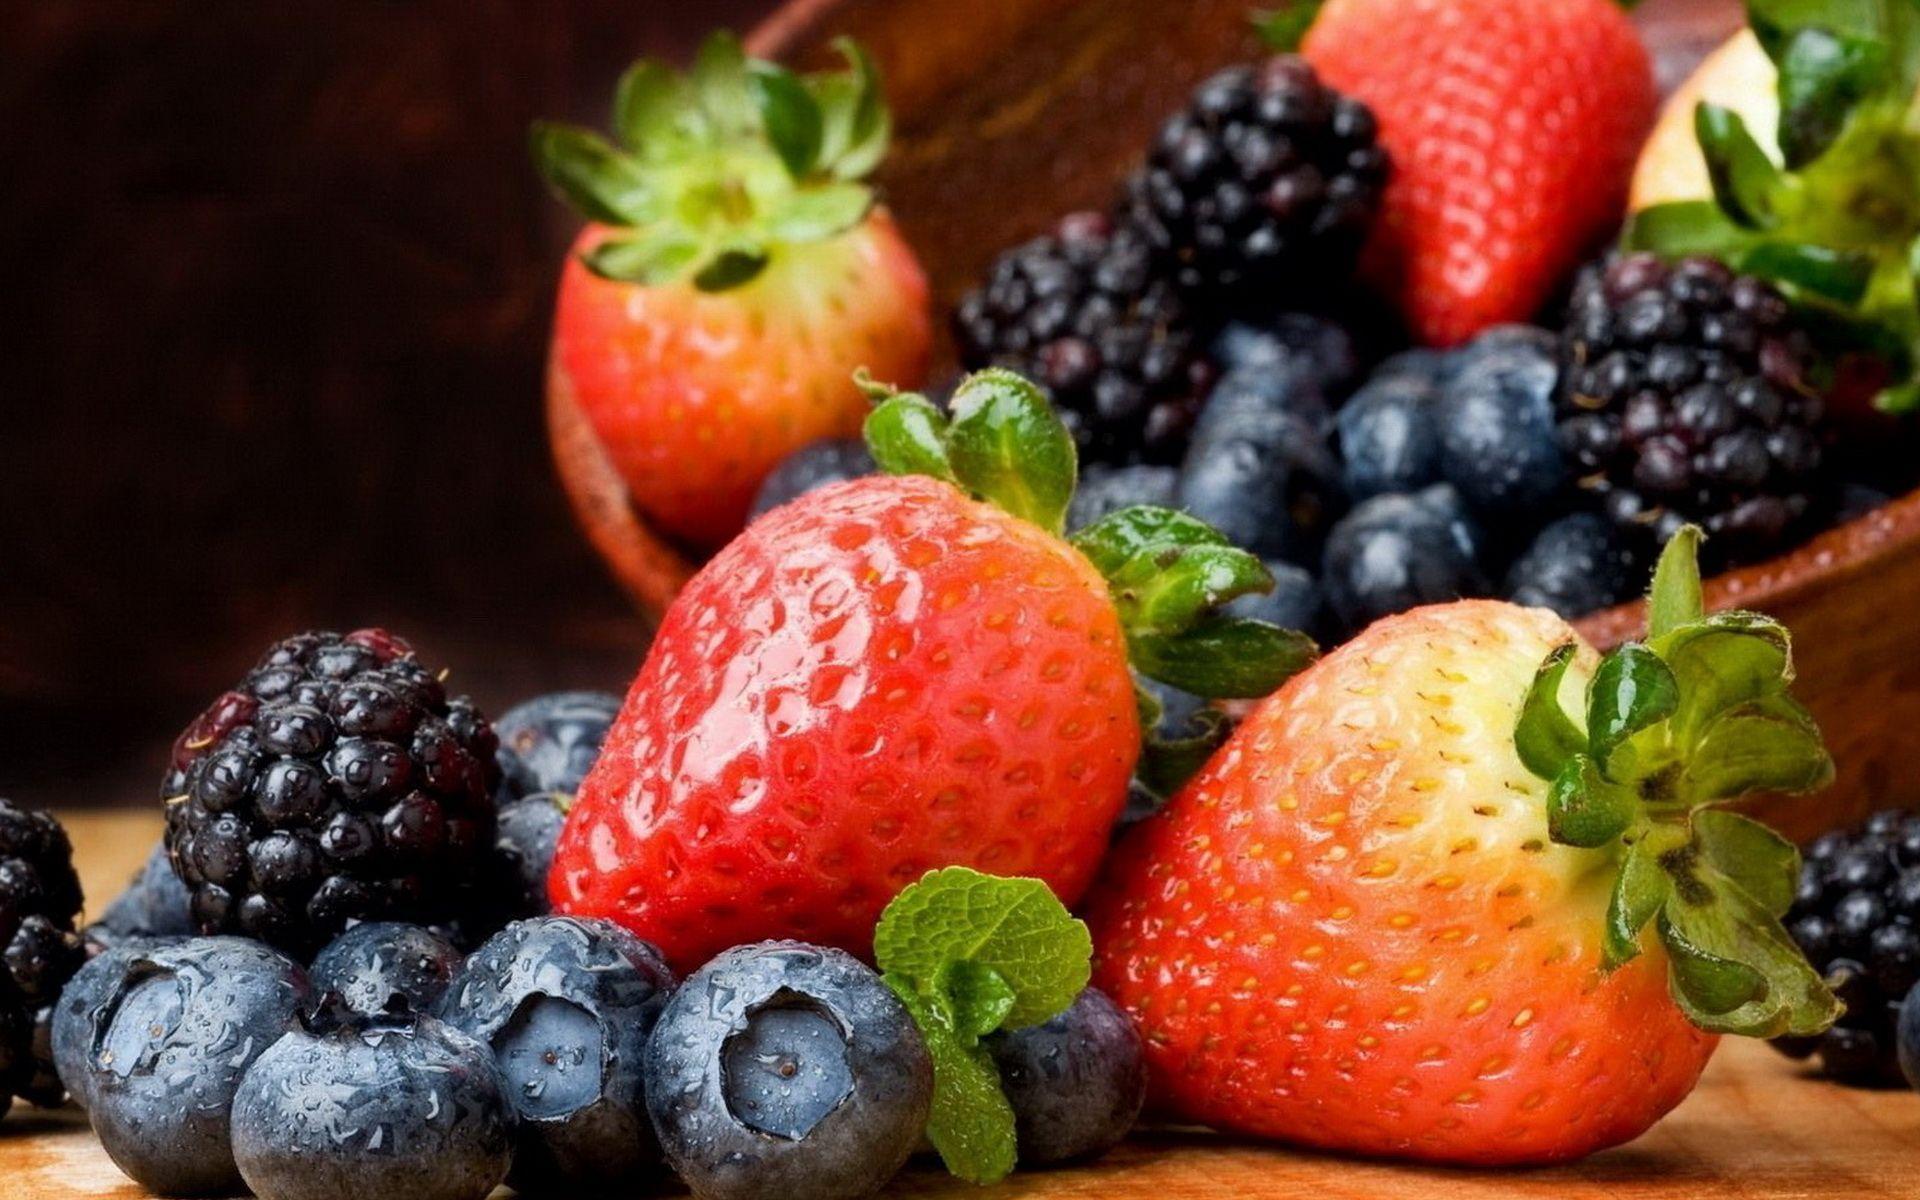 Berries And Fruits And Nuts Wallpaper, Berries And Fruits